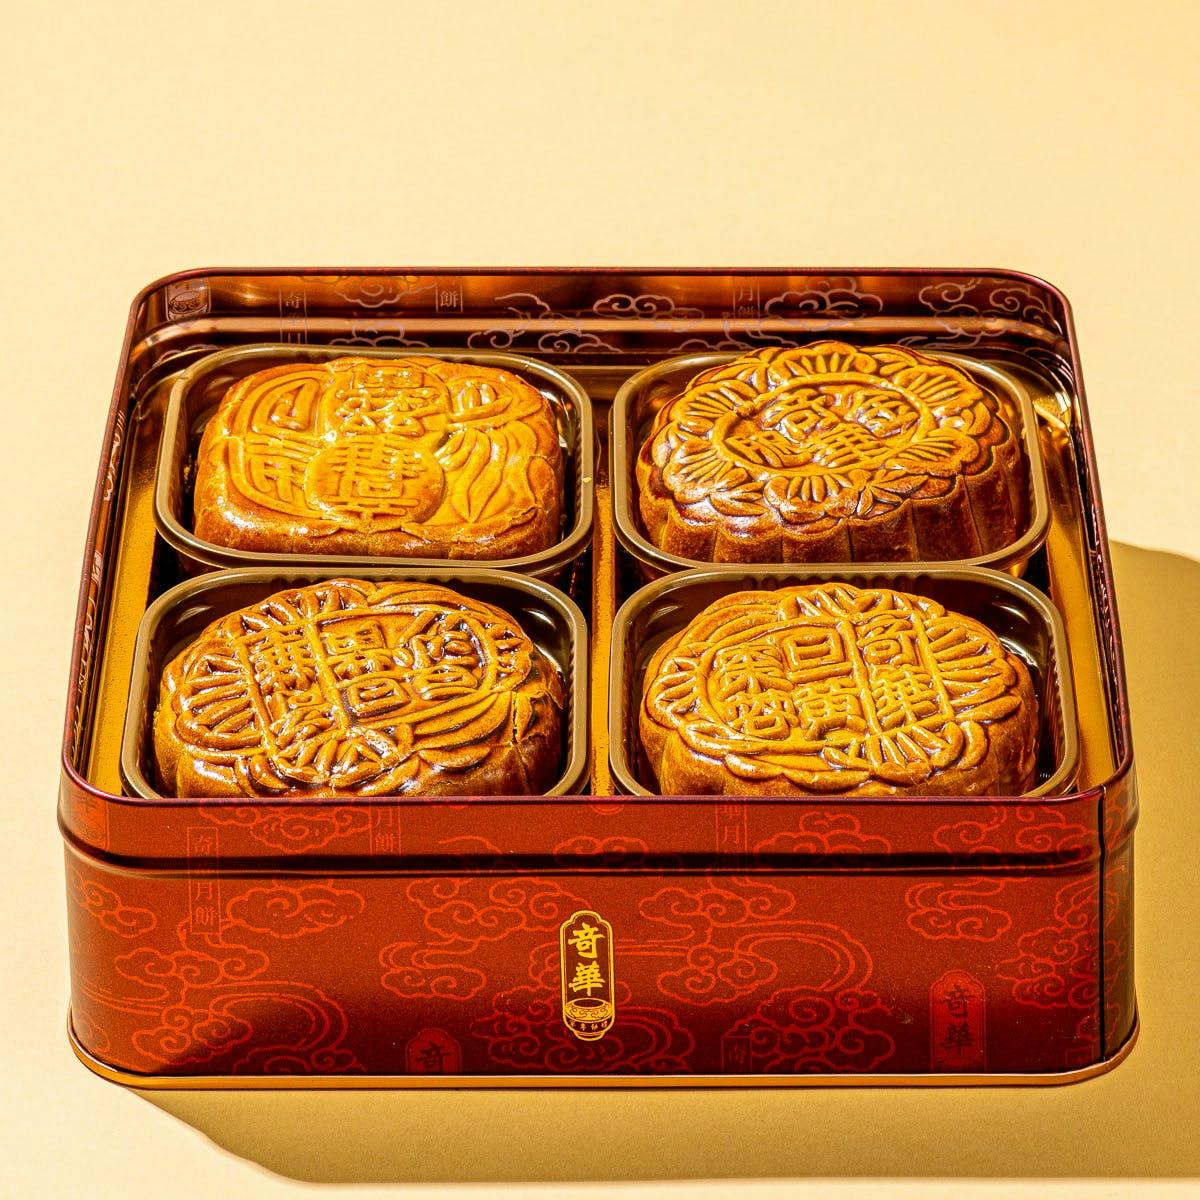 The Mooncake Gift Boxes That Keep On Giving